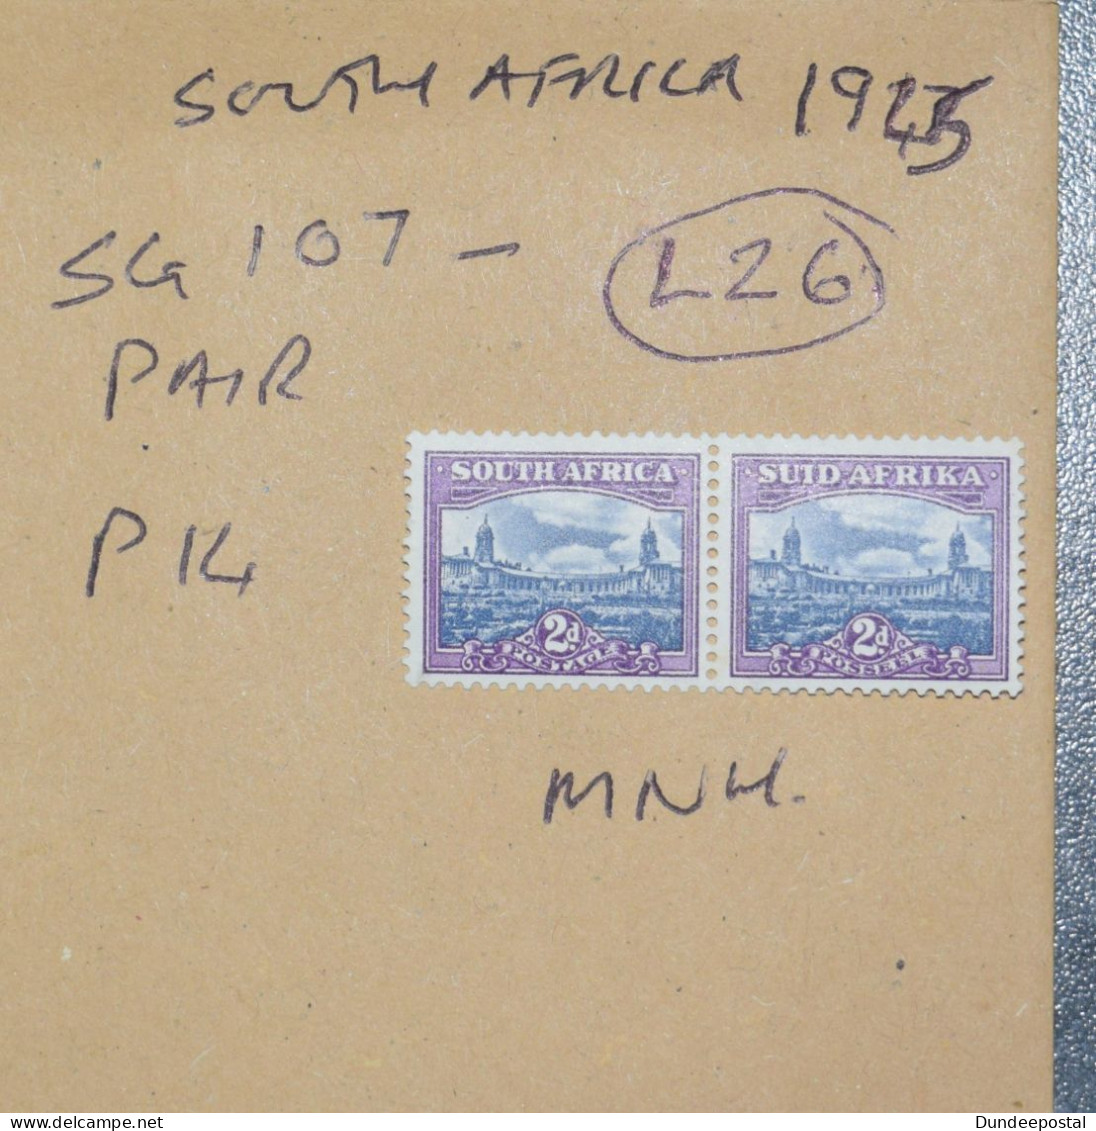 SOUTH AFRICA   STAMPS Bilingual Pair  2d  1945  L26  ~~L@@K~~ - Unused Stamps